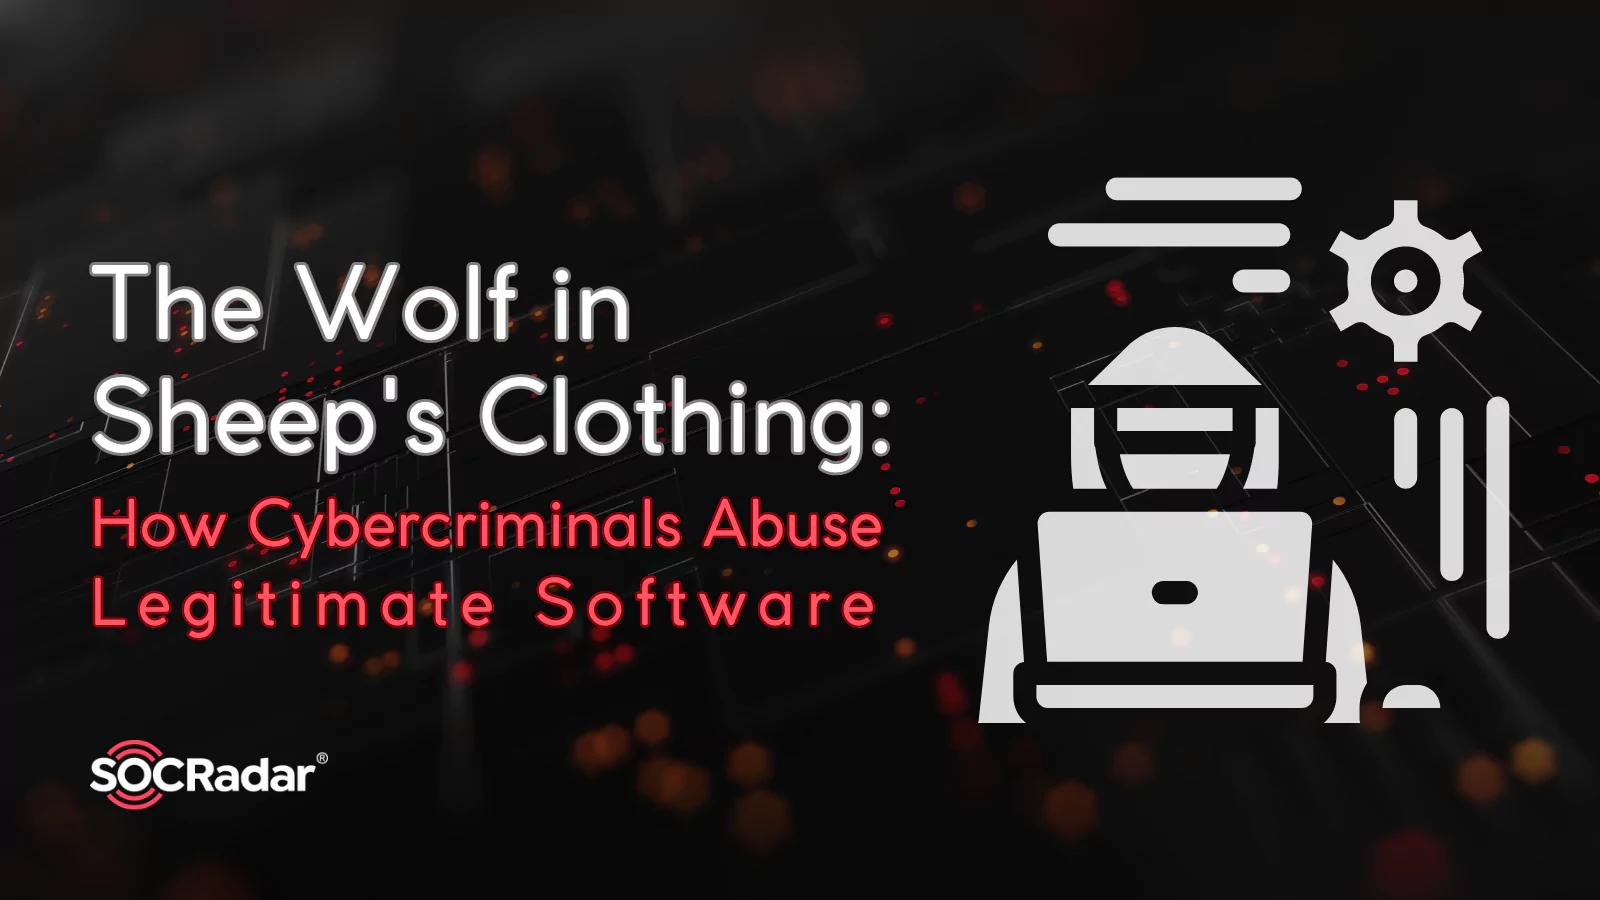 SOCRadar® Cyber Intelligence Inc. | The Wolf in Sheep's Clothing: How Cybercriminals Abuse Legitimate Software